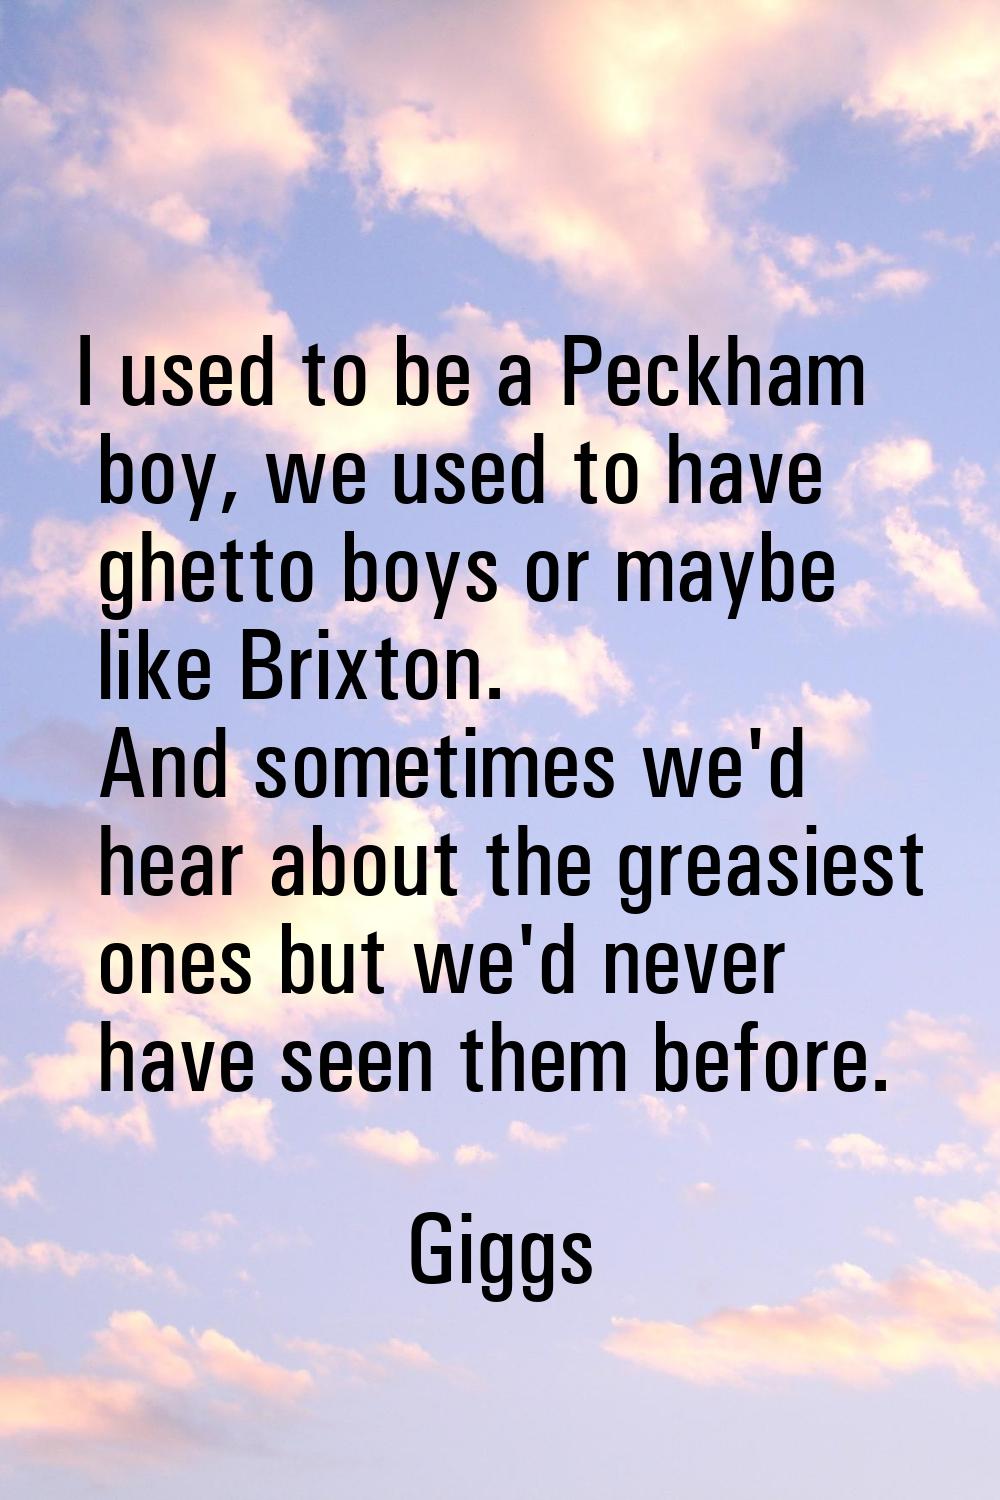 I used to be a Peckham boy, we used to have ghetto boys or maybe like Brixton. And sometimes we'd h